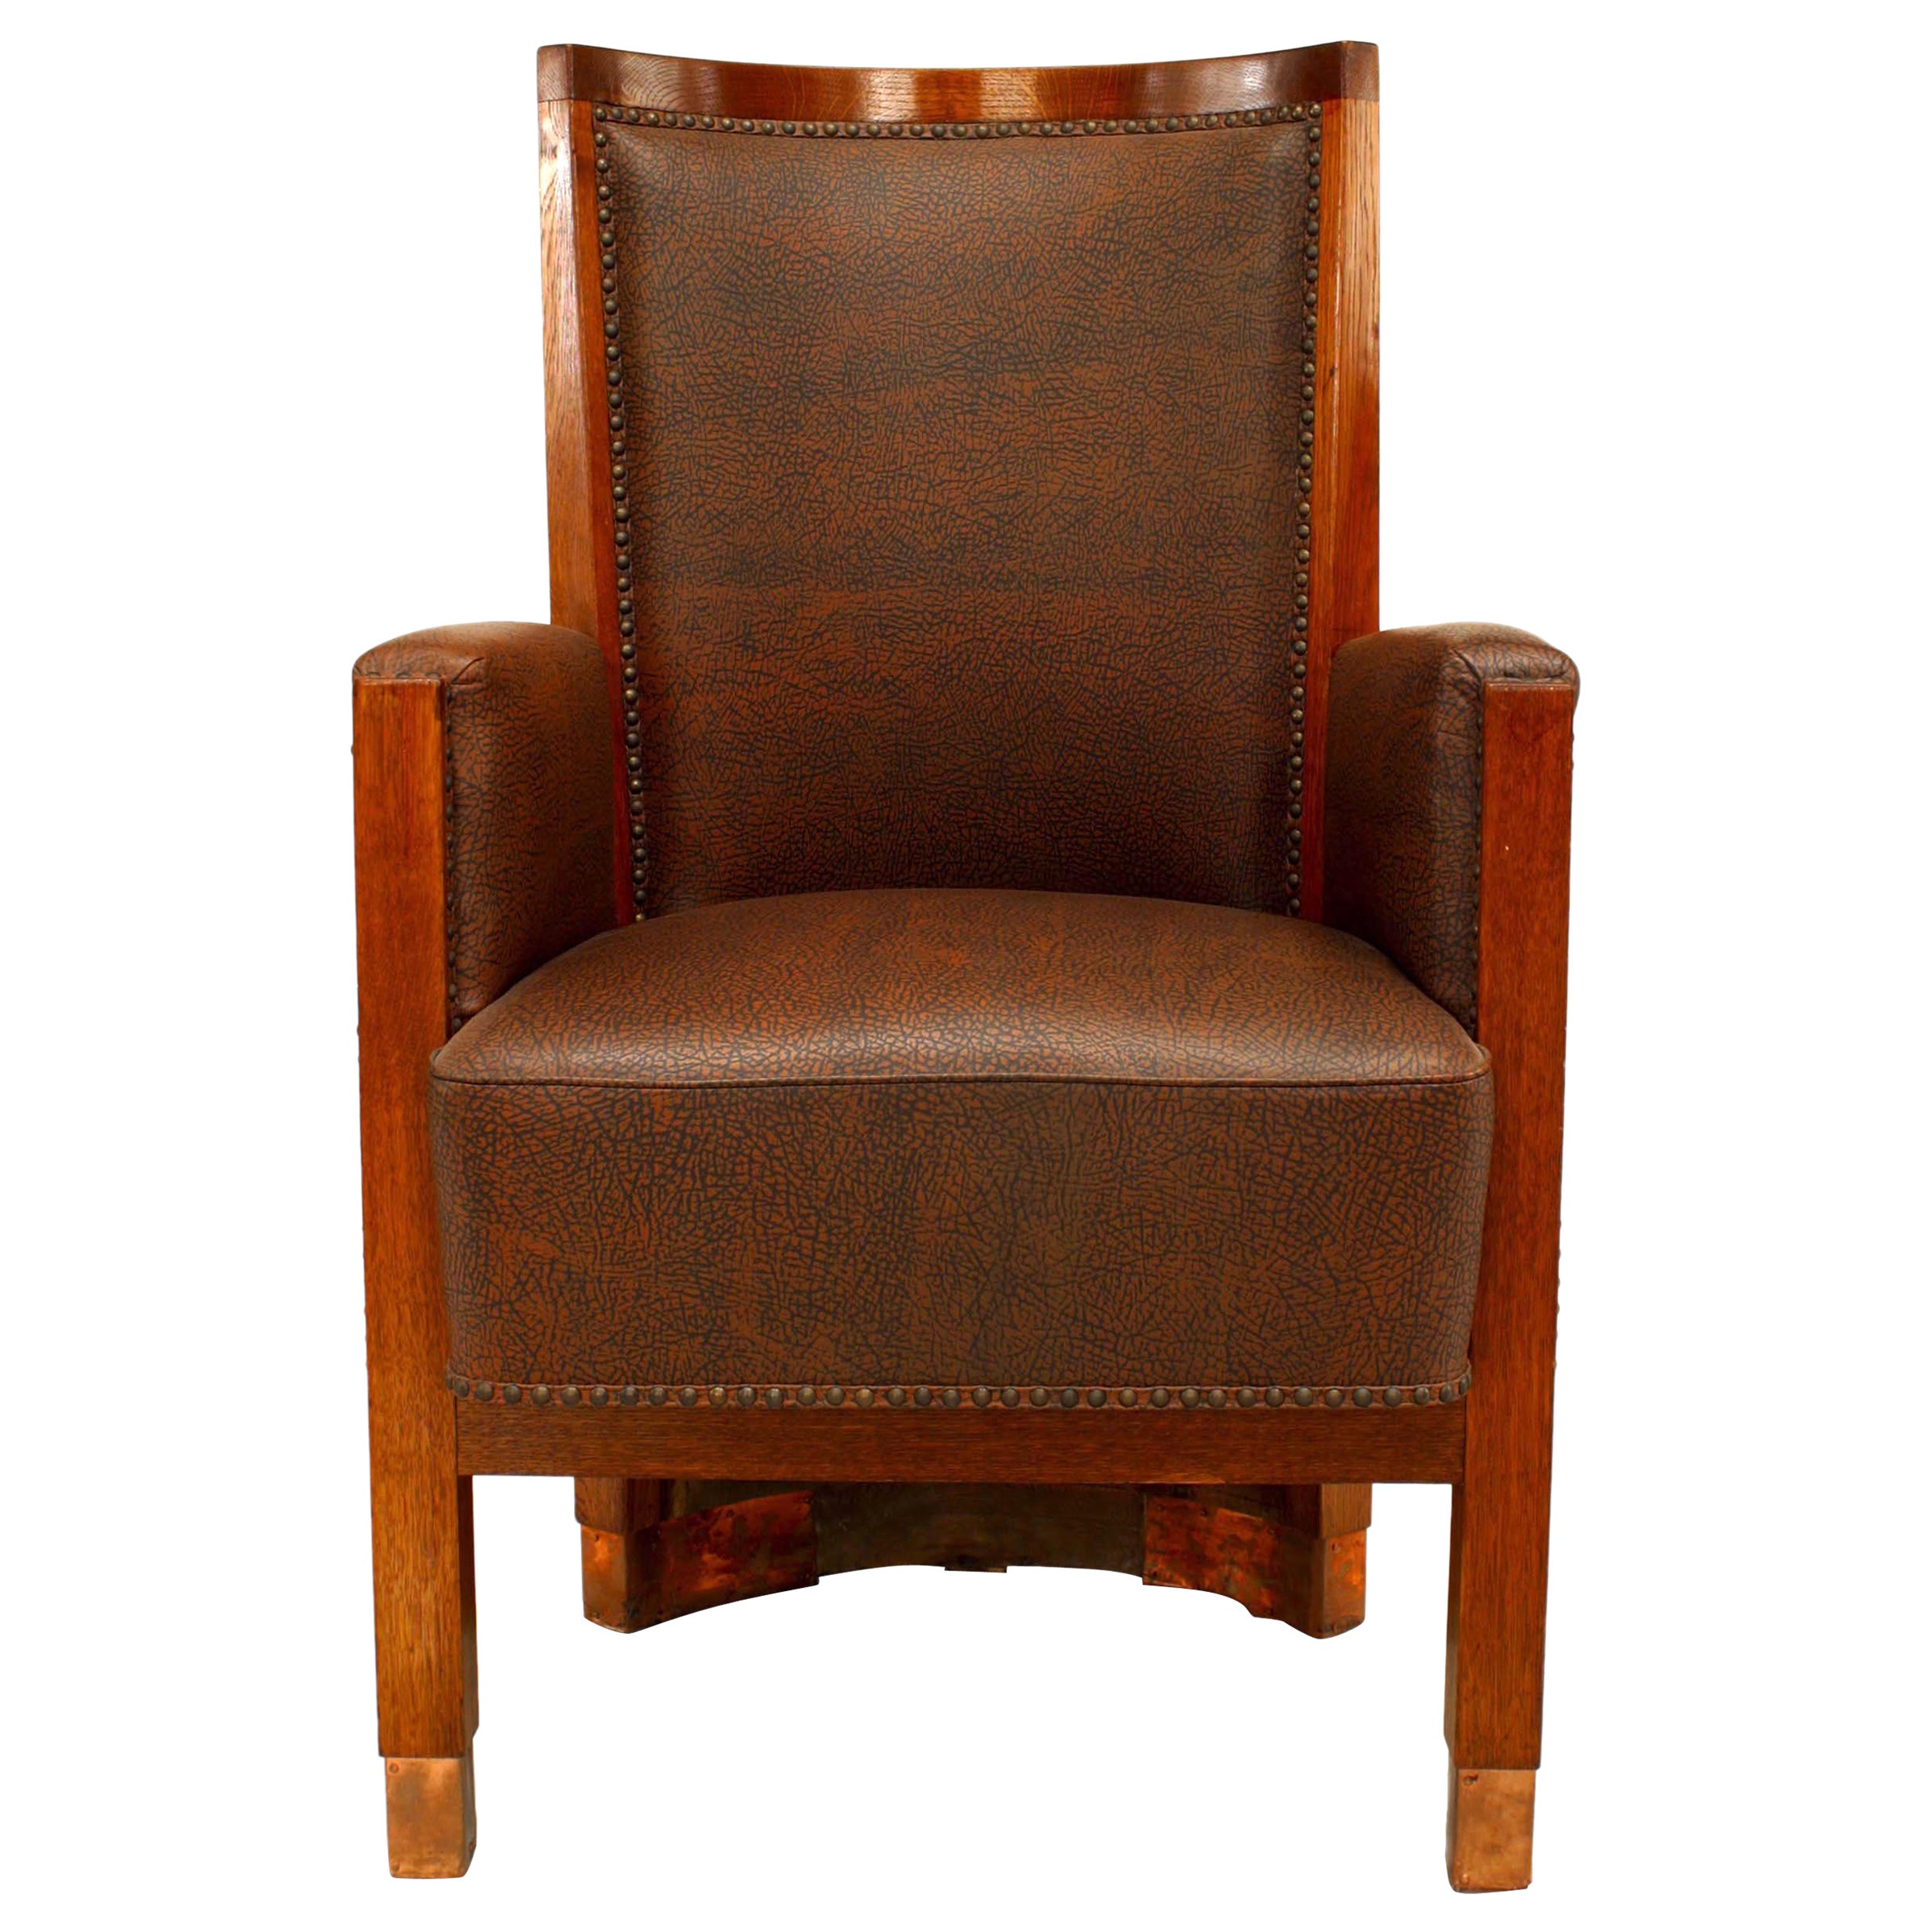 American Mission Oak Arm Chairs For, Mission Style Leather Chairs